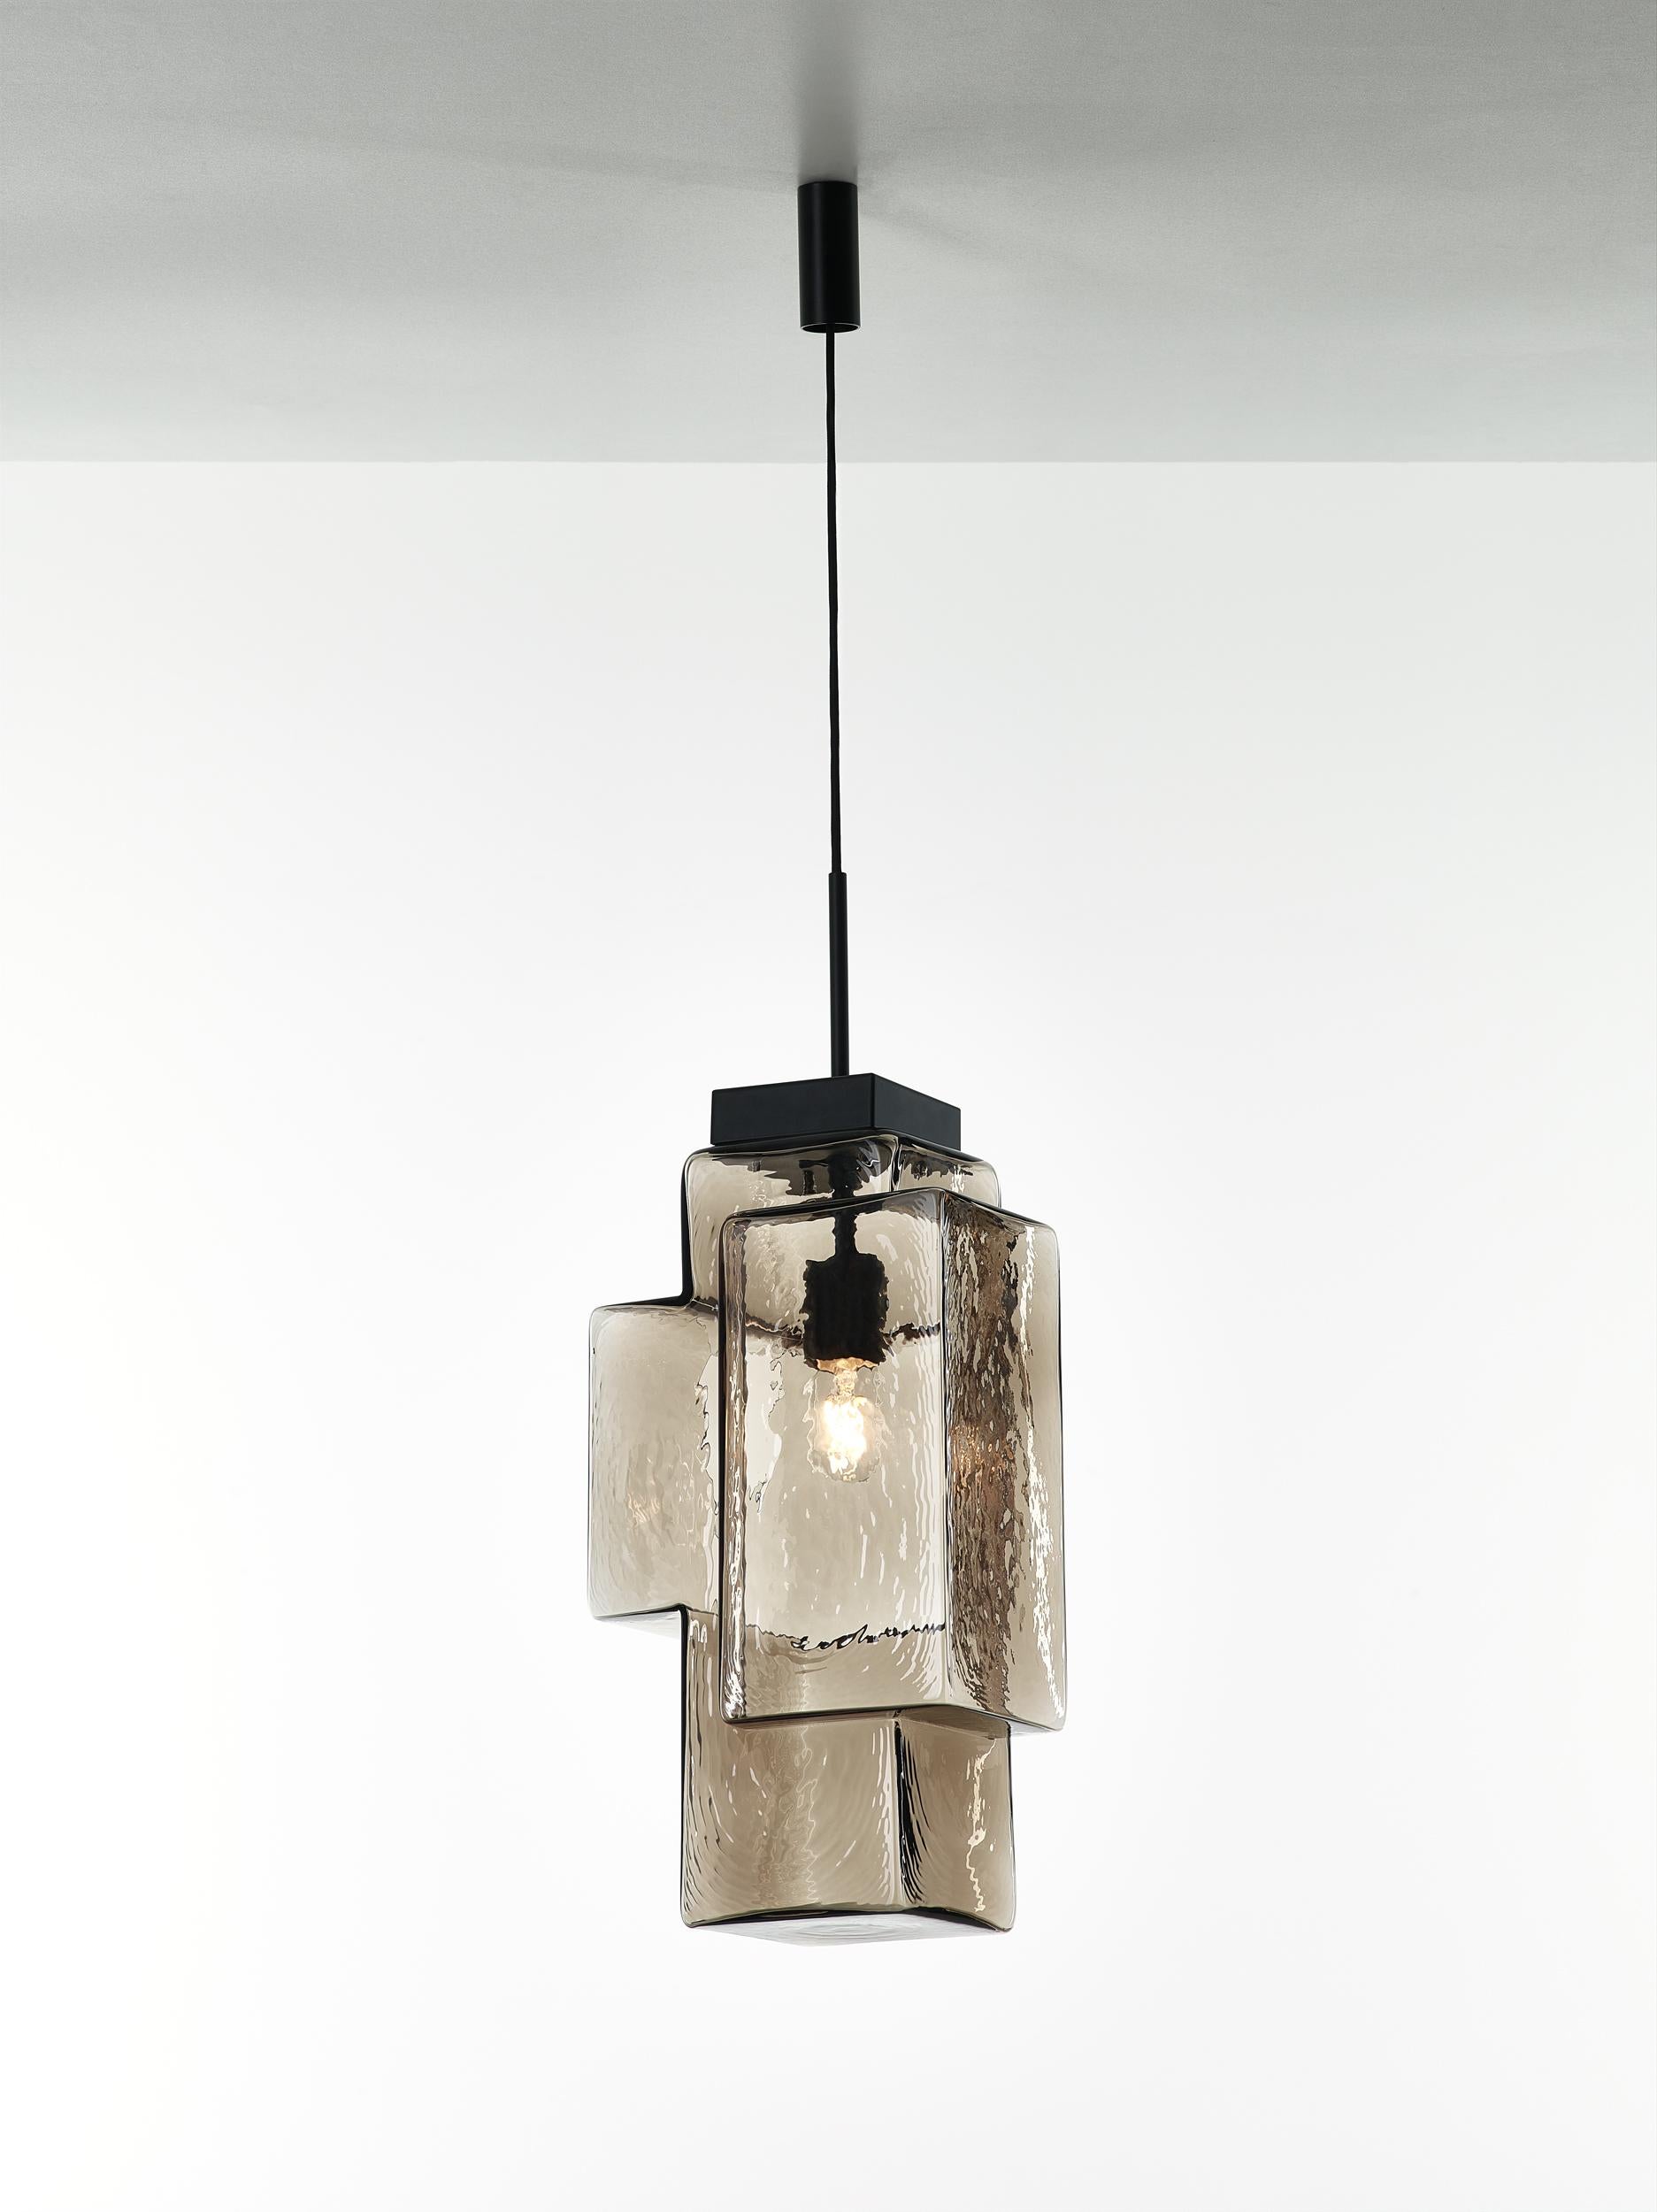 Smoke grey Tetris pendant light by Dechem Studio.
Dimensions: W 30 x D 23 x H 200 cm.
Materials: metal, glass.
Also available: different colours available.
In this complex lighting fixture, strict geometric and architectural lines contrast with